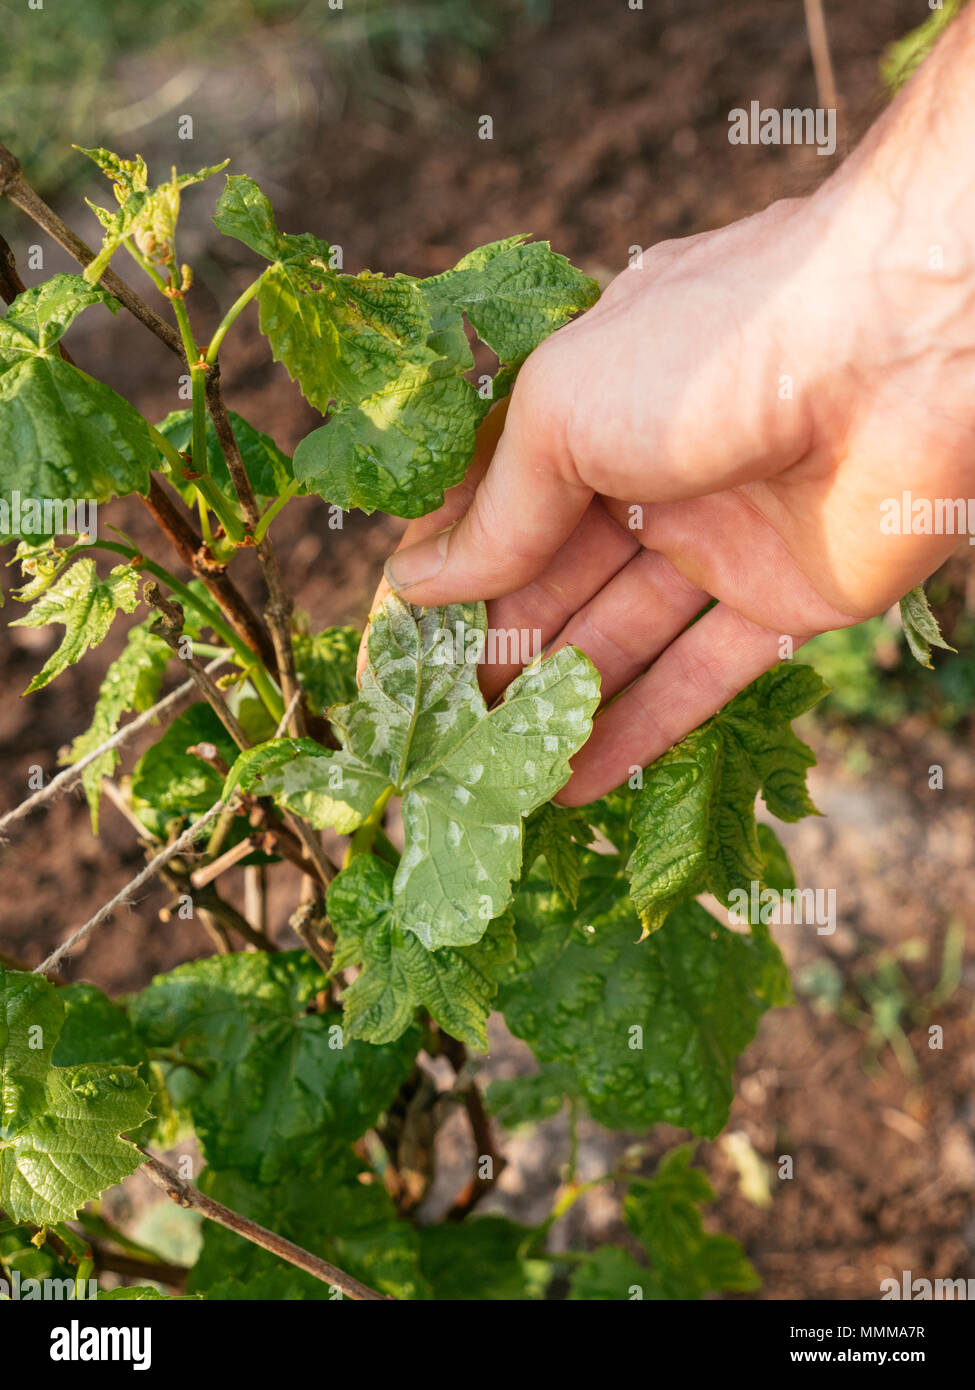 Gardner inspecting a grapevine with mildew Stock Photo